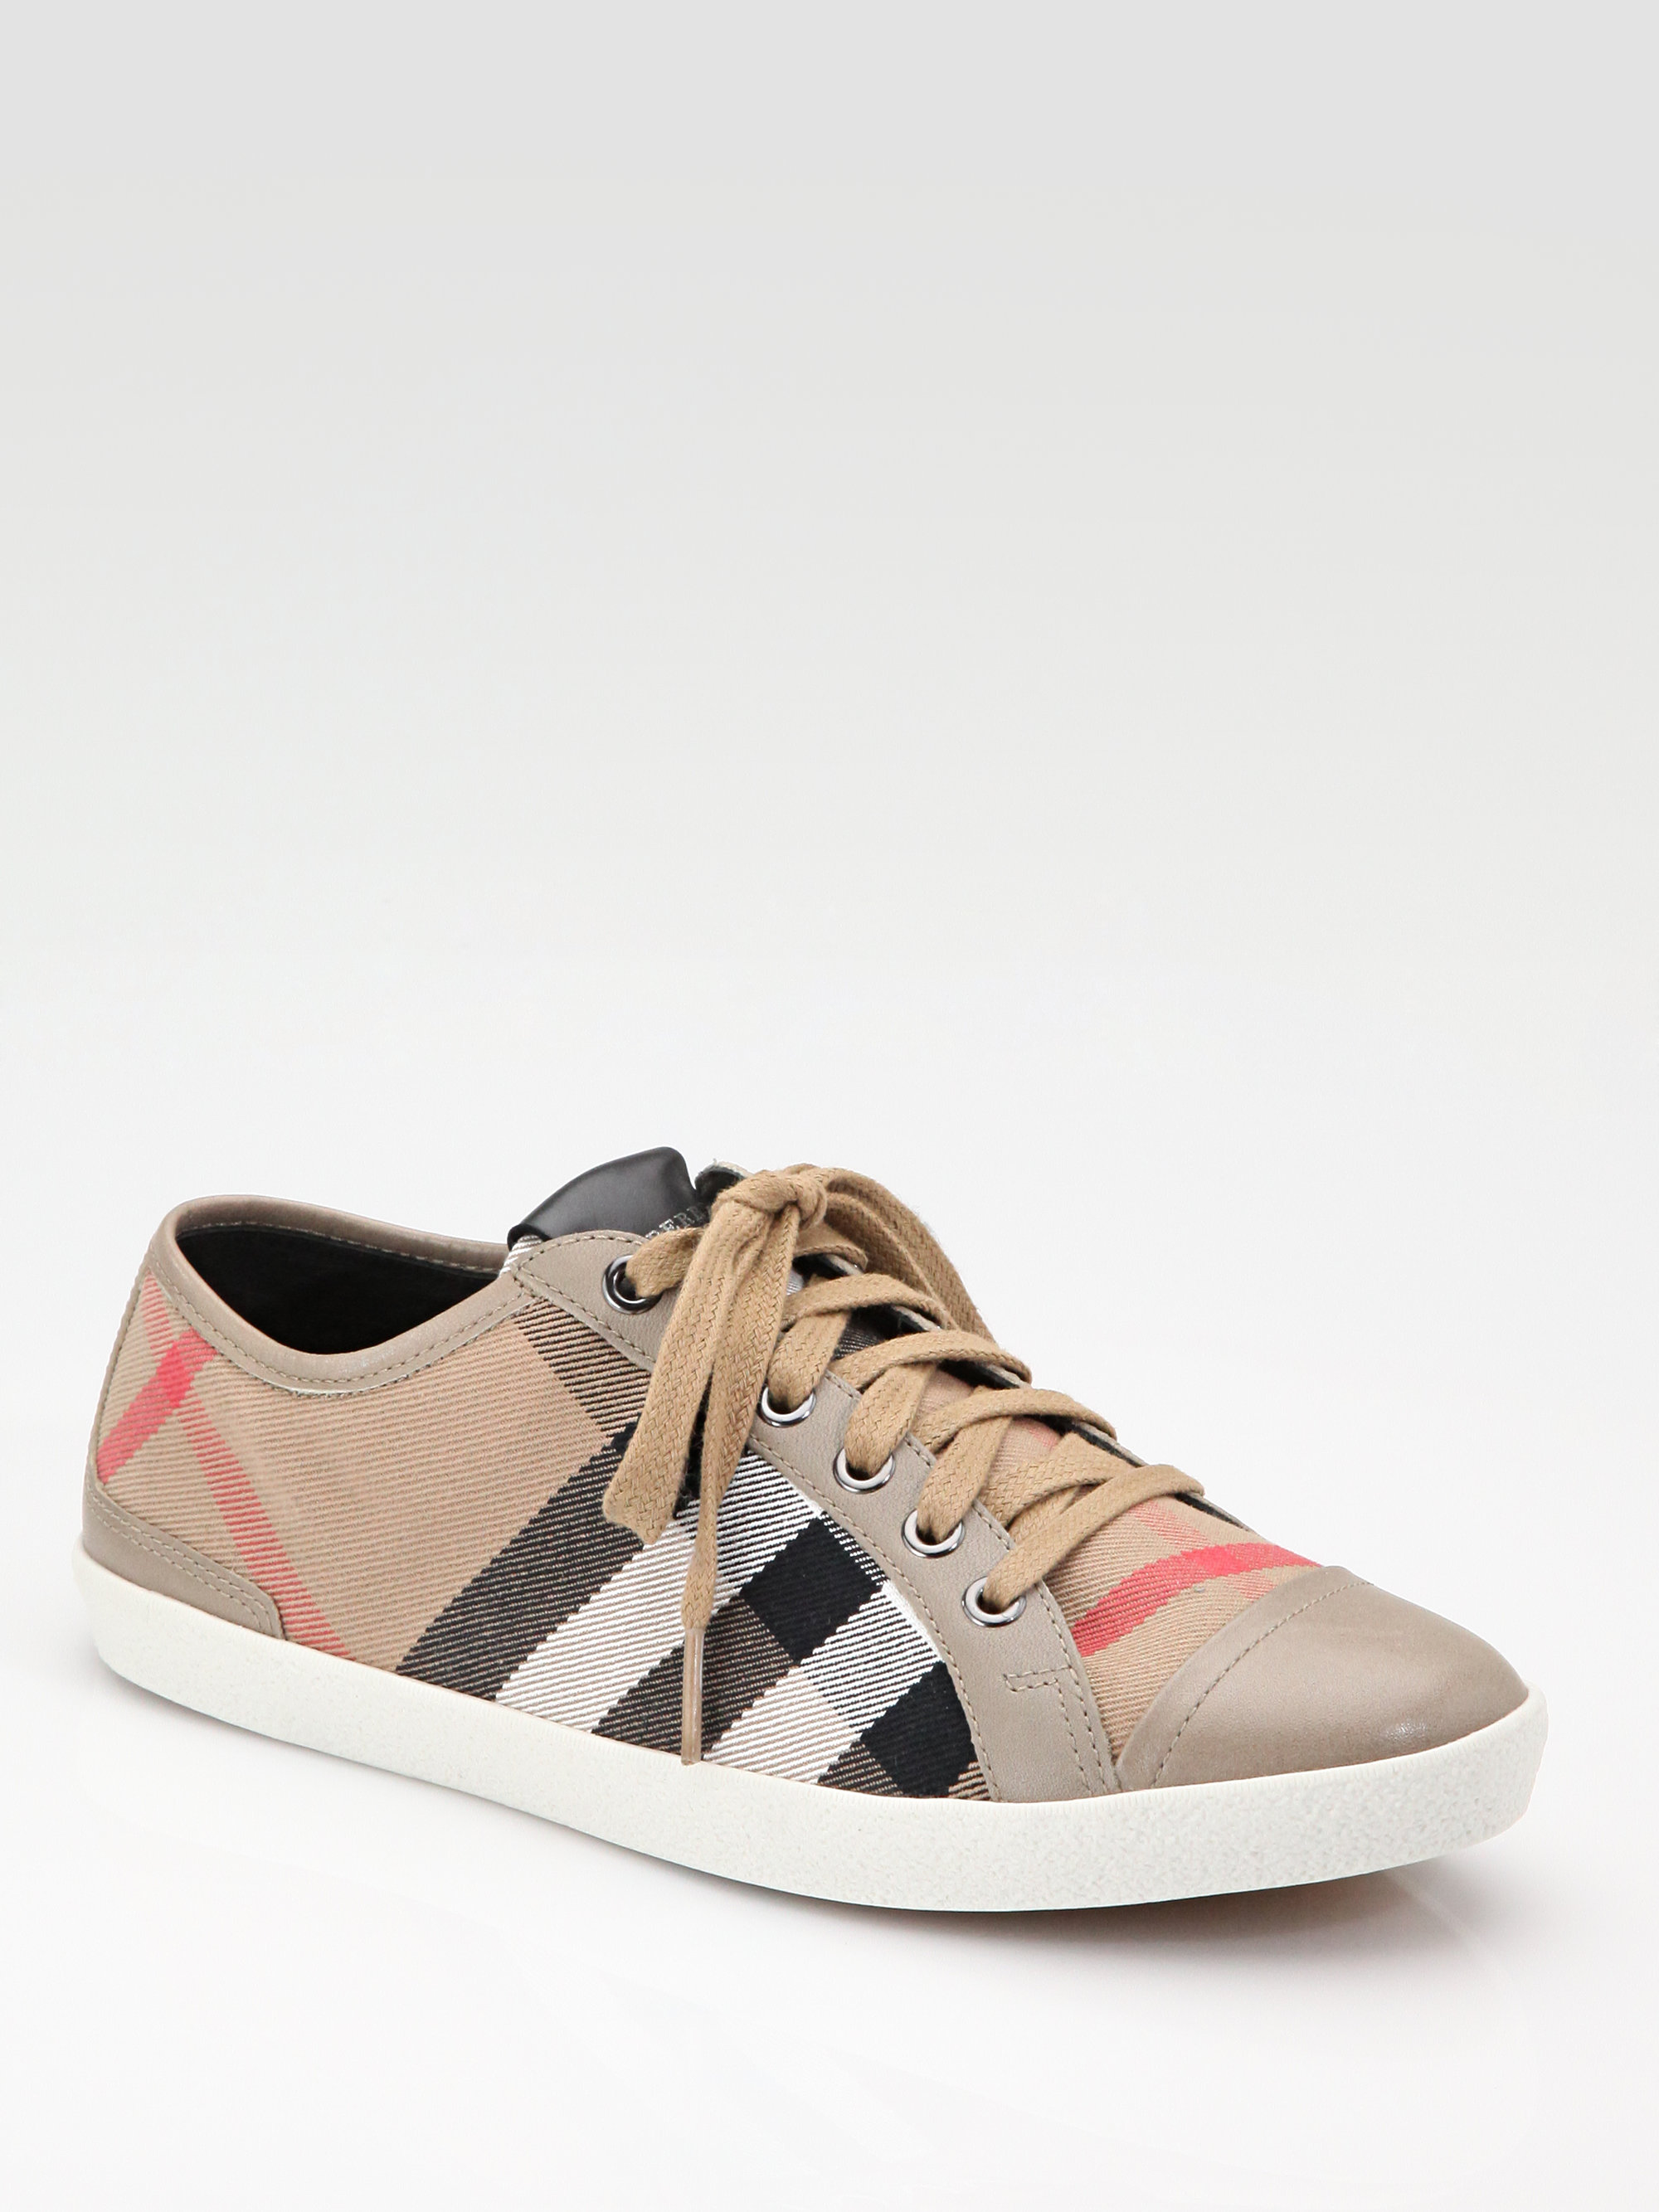 burberry sneakers for women